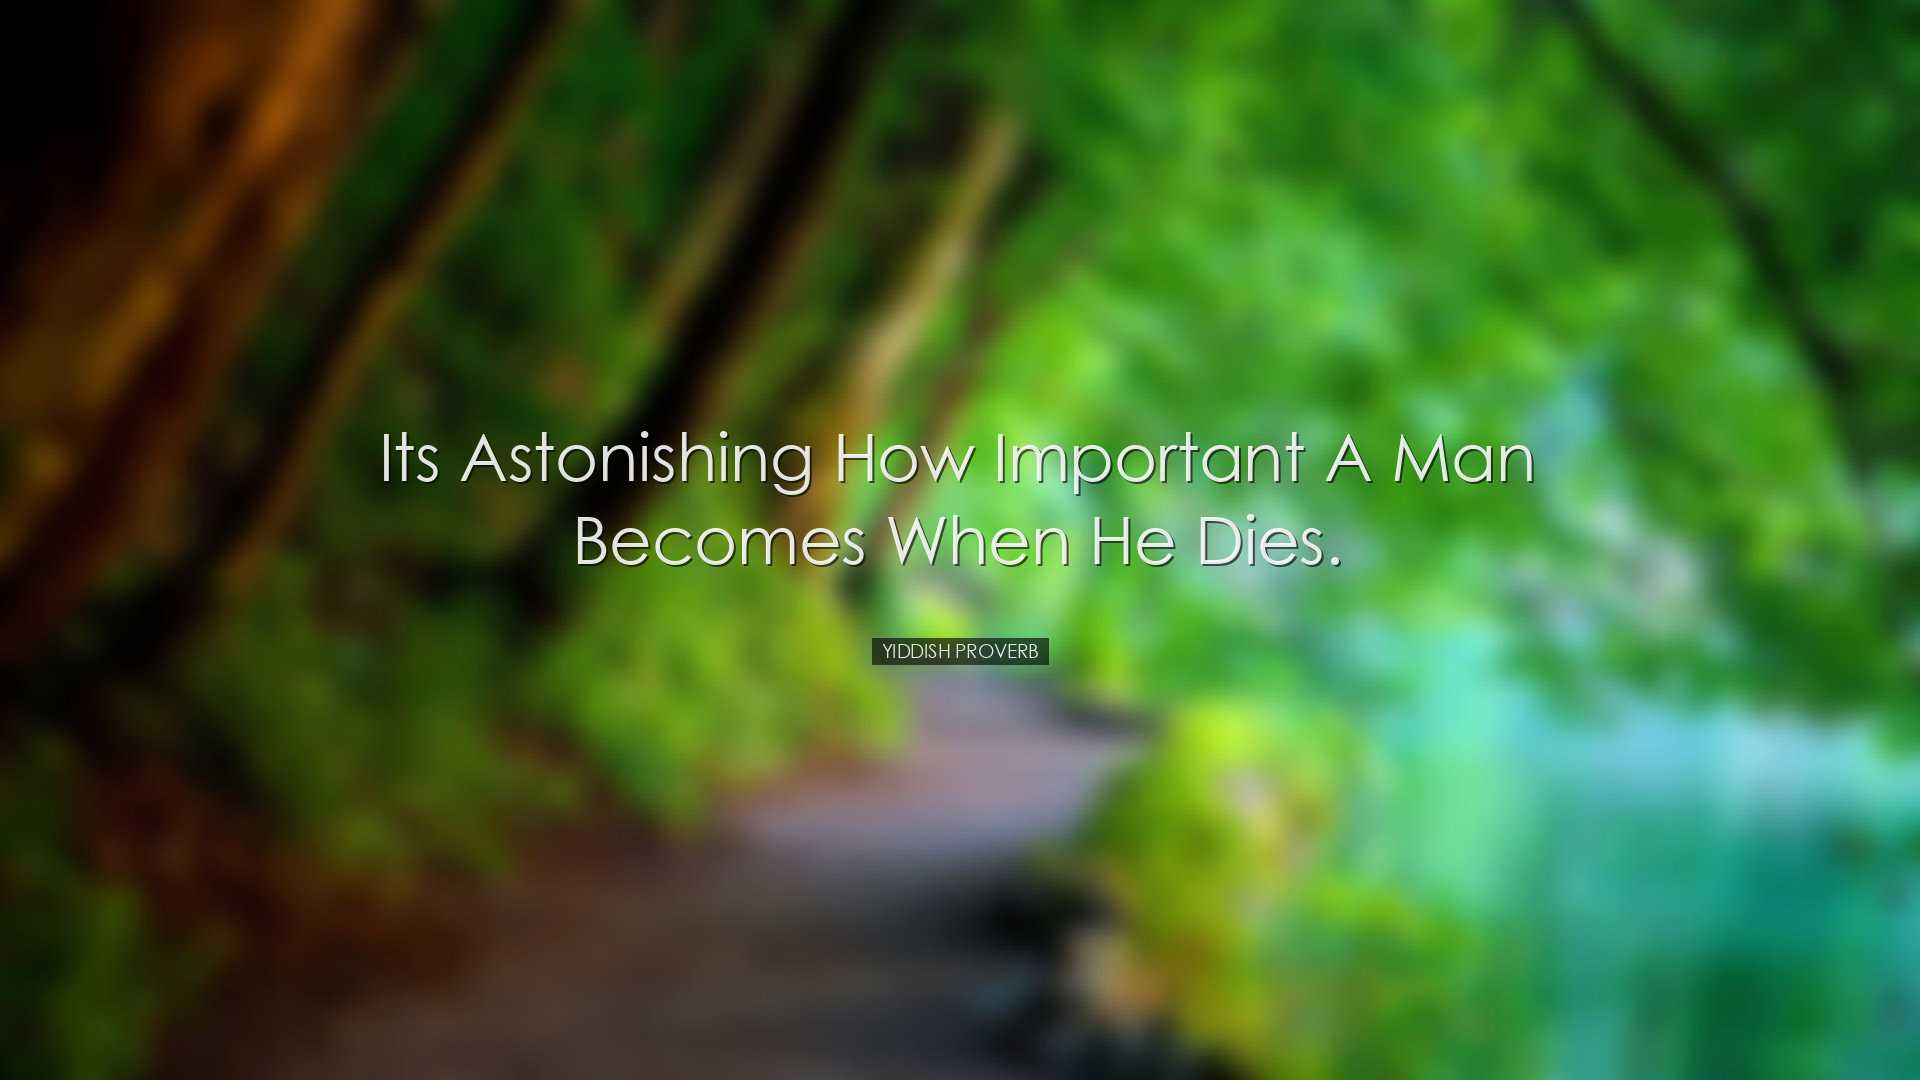 Its astonishing how important a man becomes when he dies. - Yiddis